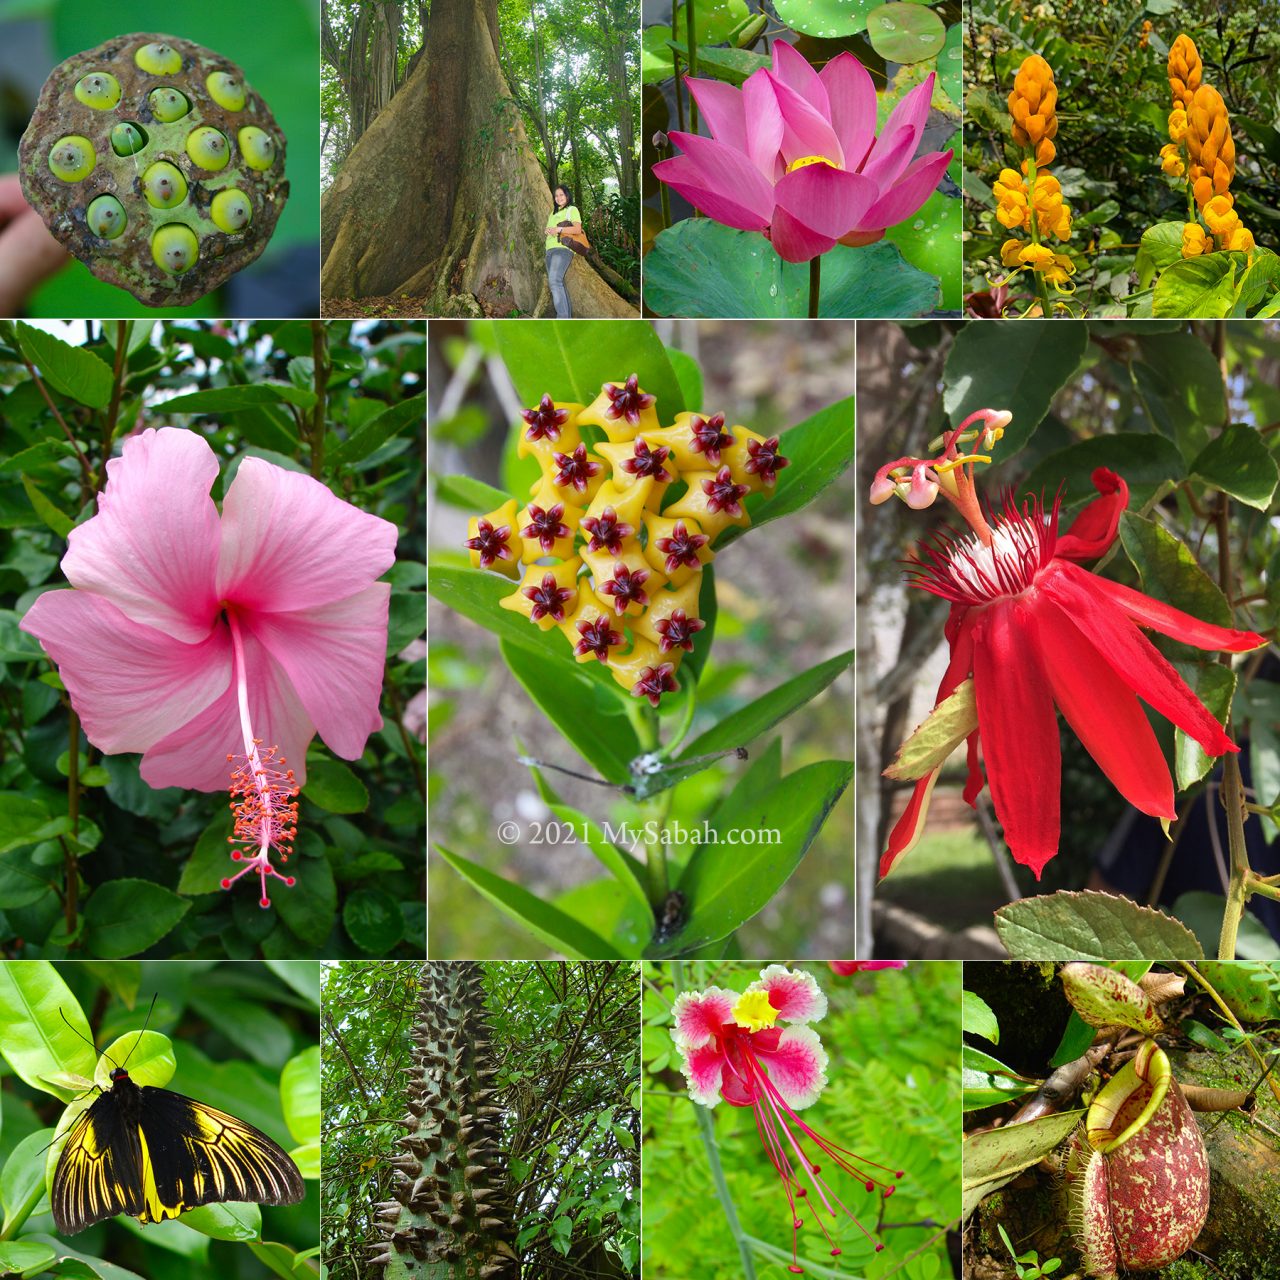 Flowers, trees and fruits in Sabah Agriculture Park